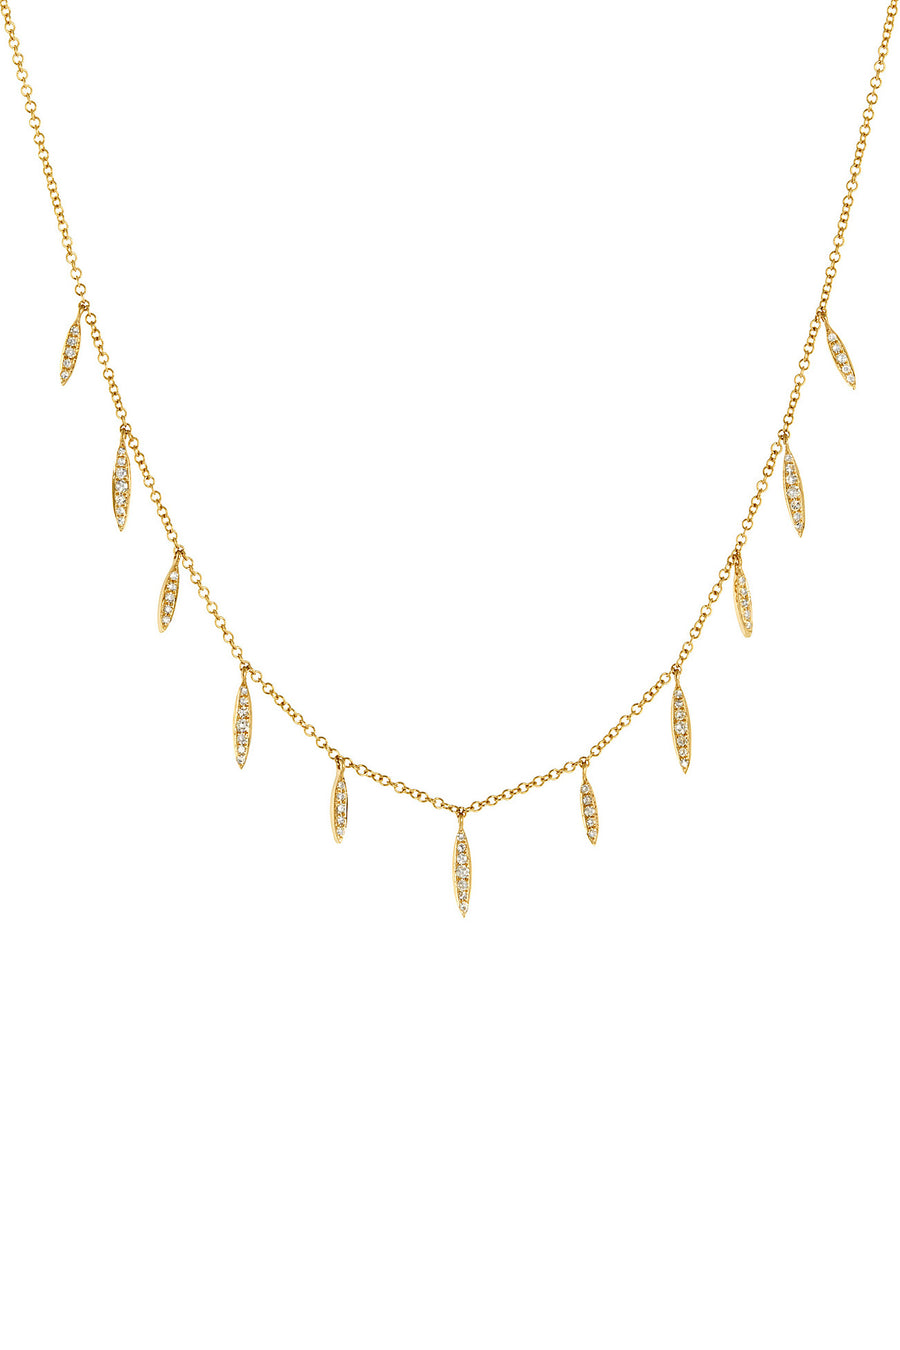 Eleven Wishes Deluxe Diamond Necklace in 14K Yellow Gold